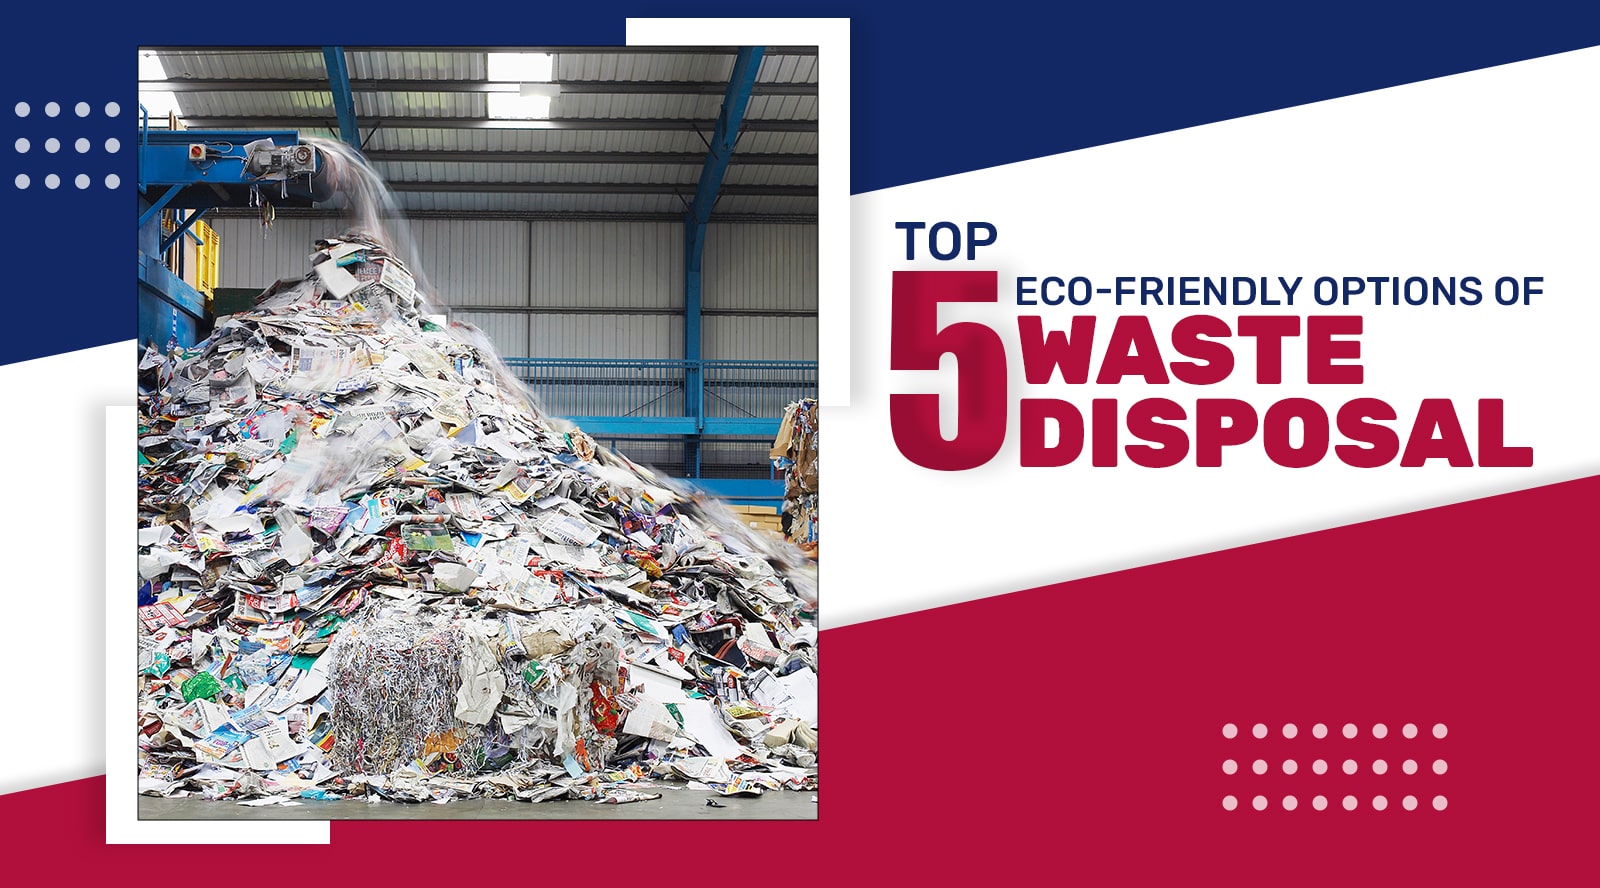 Top 5 Eco-Friendly Options of Waste Disposal